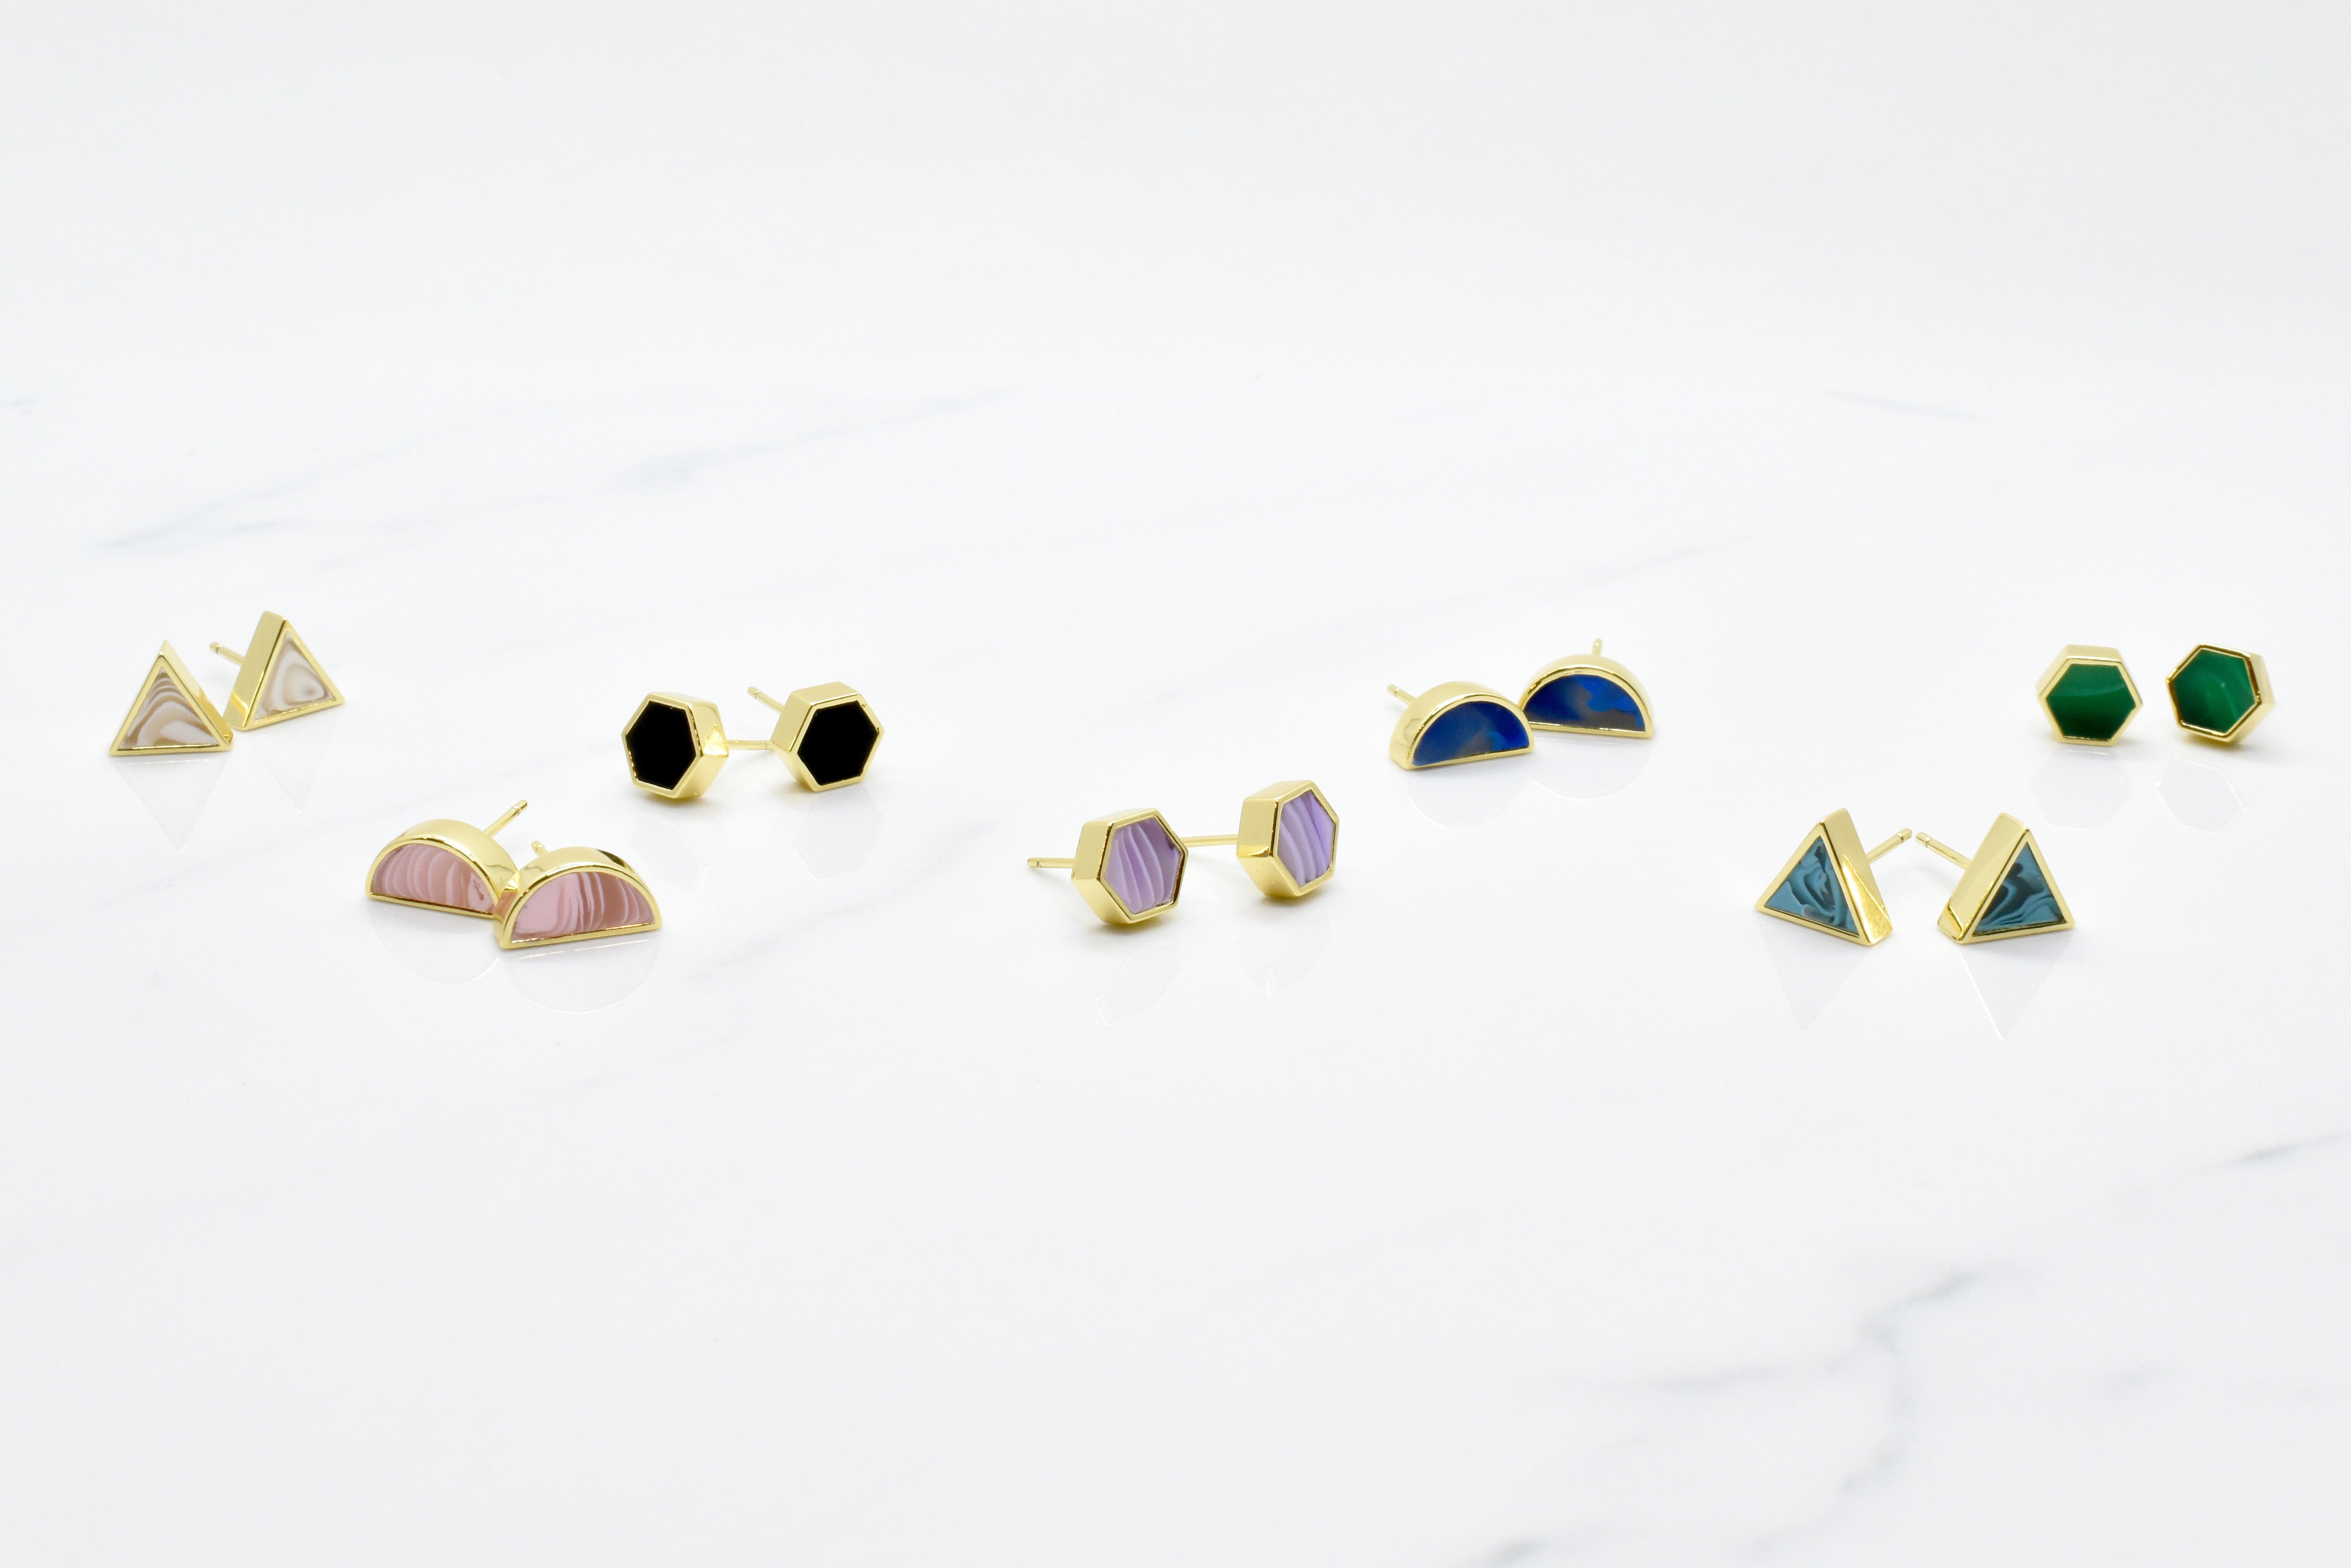 Pairs of new geo stud earrings in 14k gold, shown in triangle, half moon, and hexagon shapes